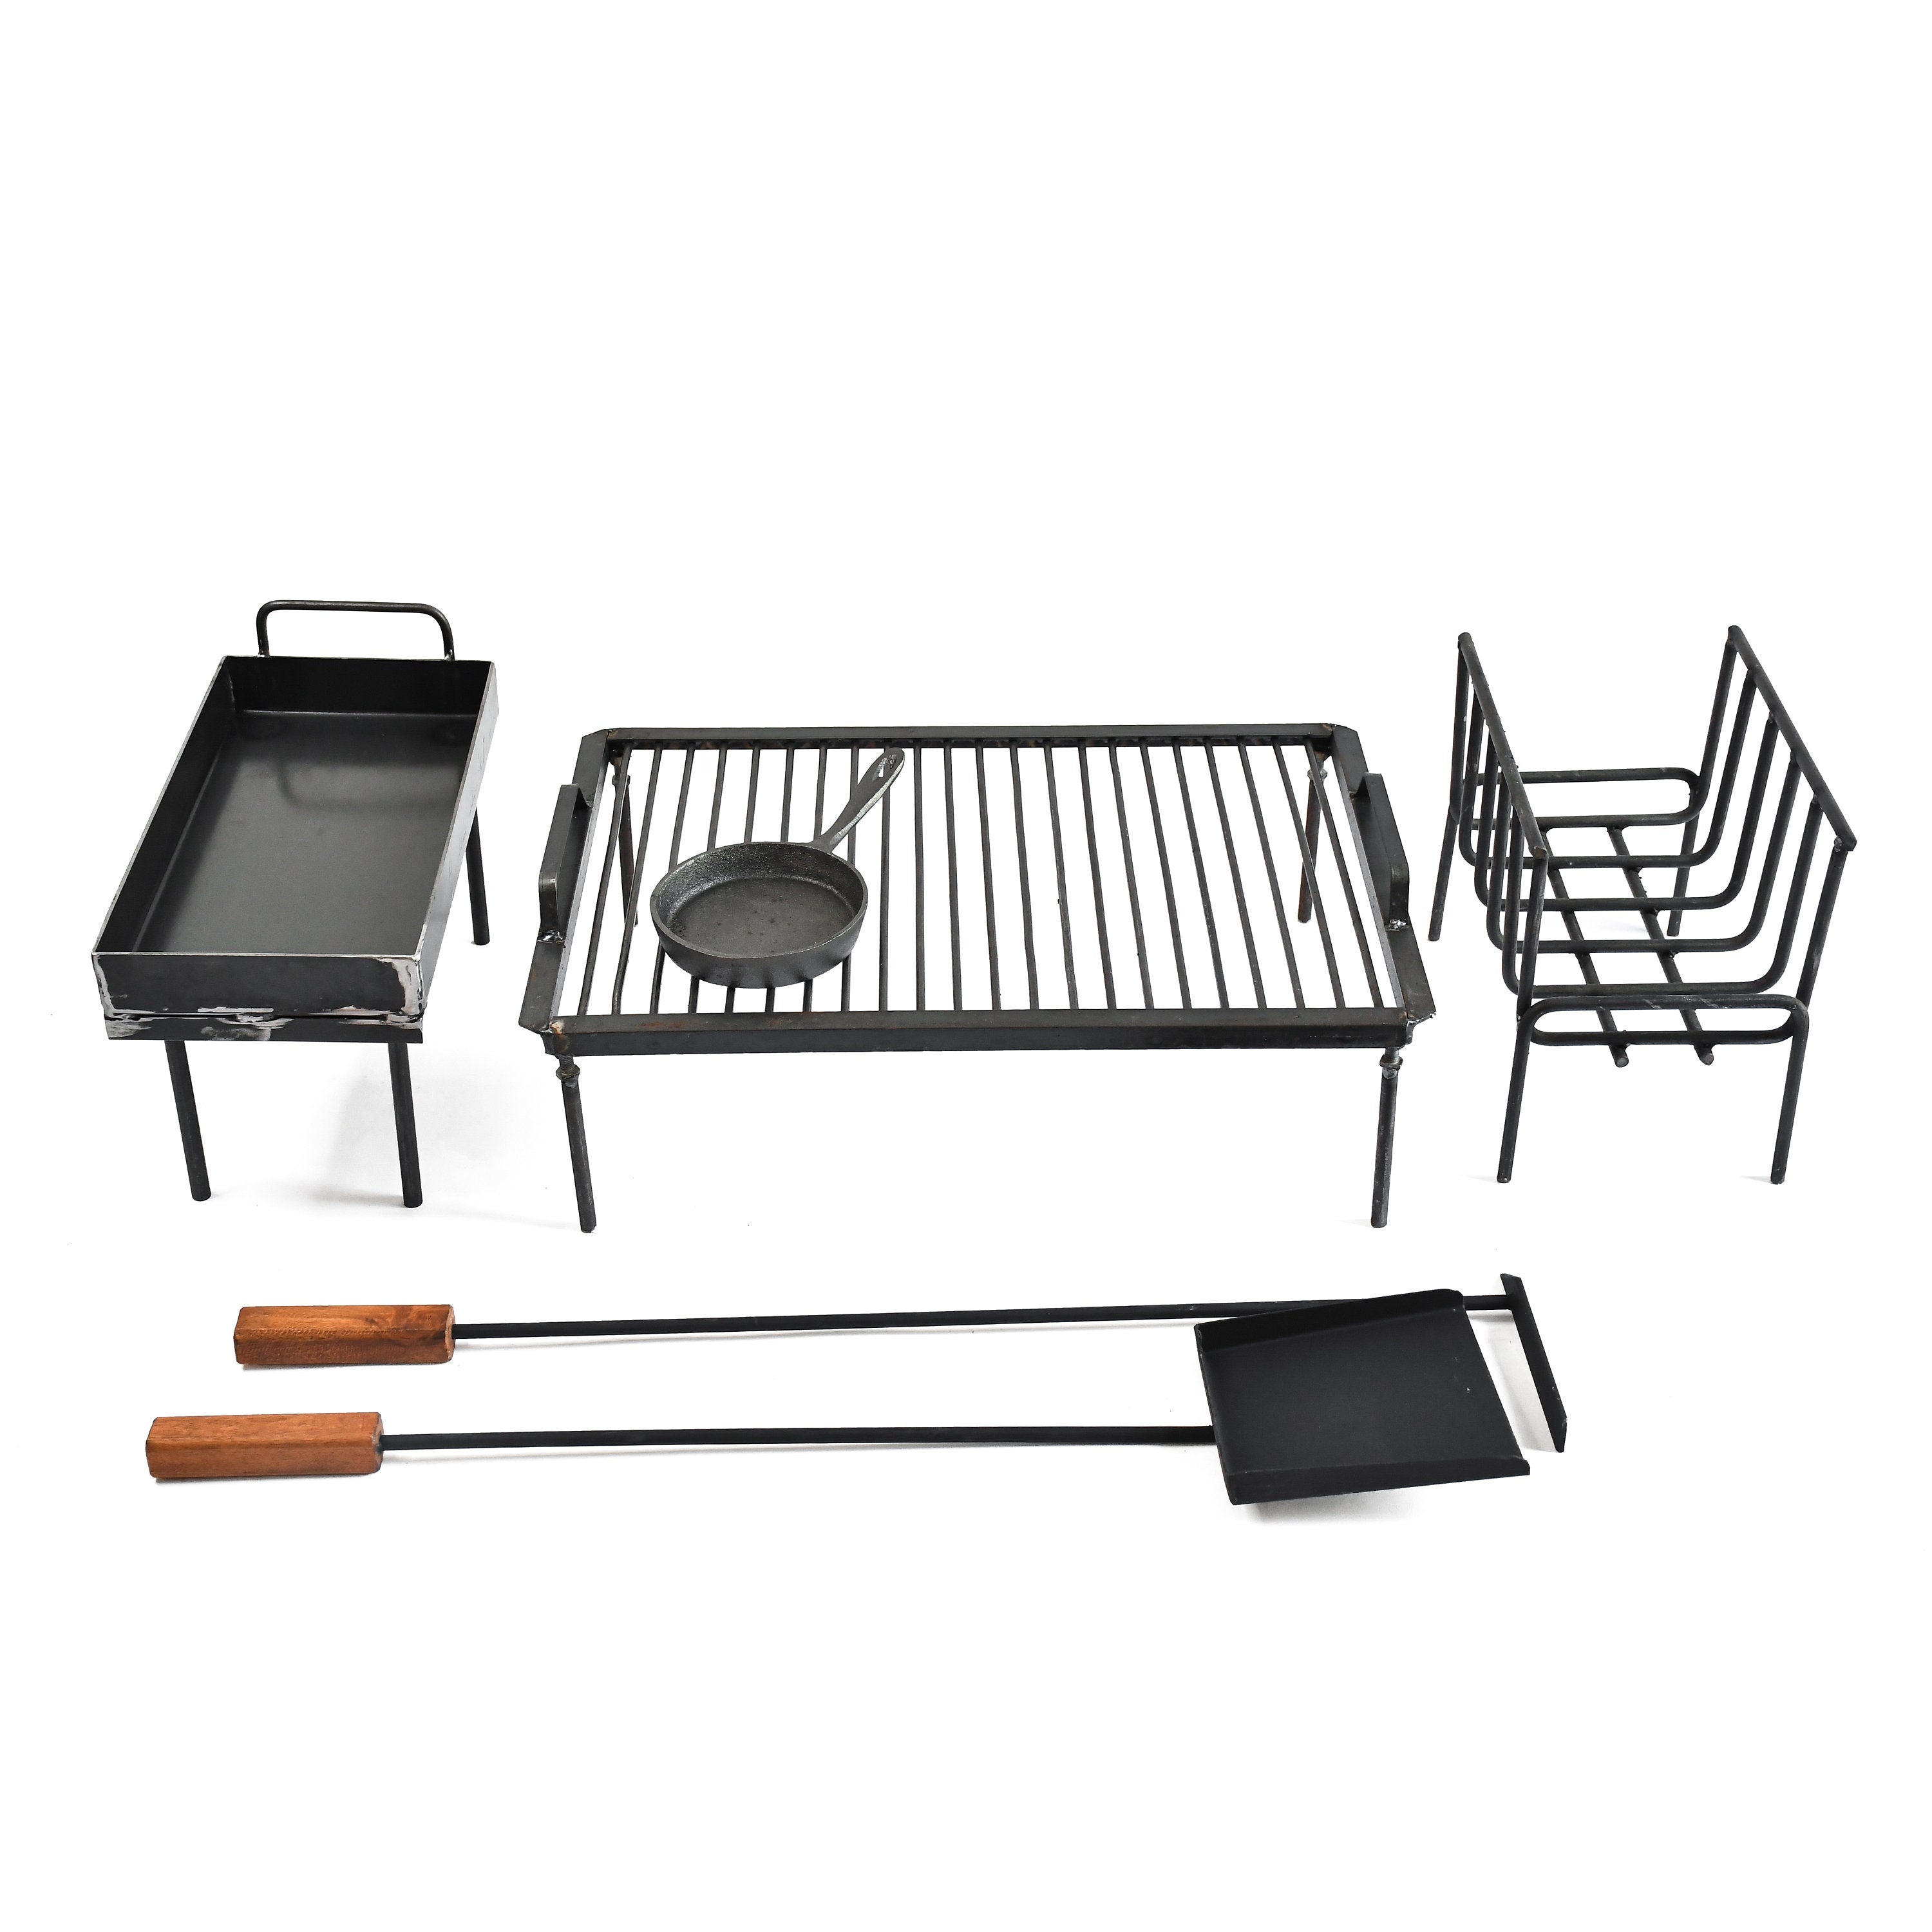 Gaucholife Medium Complete BBQ Set - Grill, Brazier, Griddle, Provoletera and FirePlace Tools